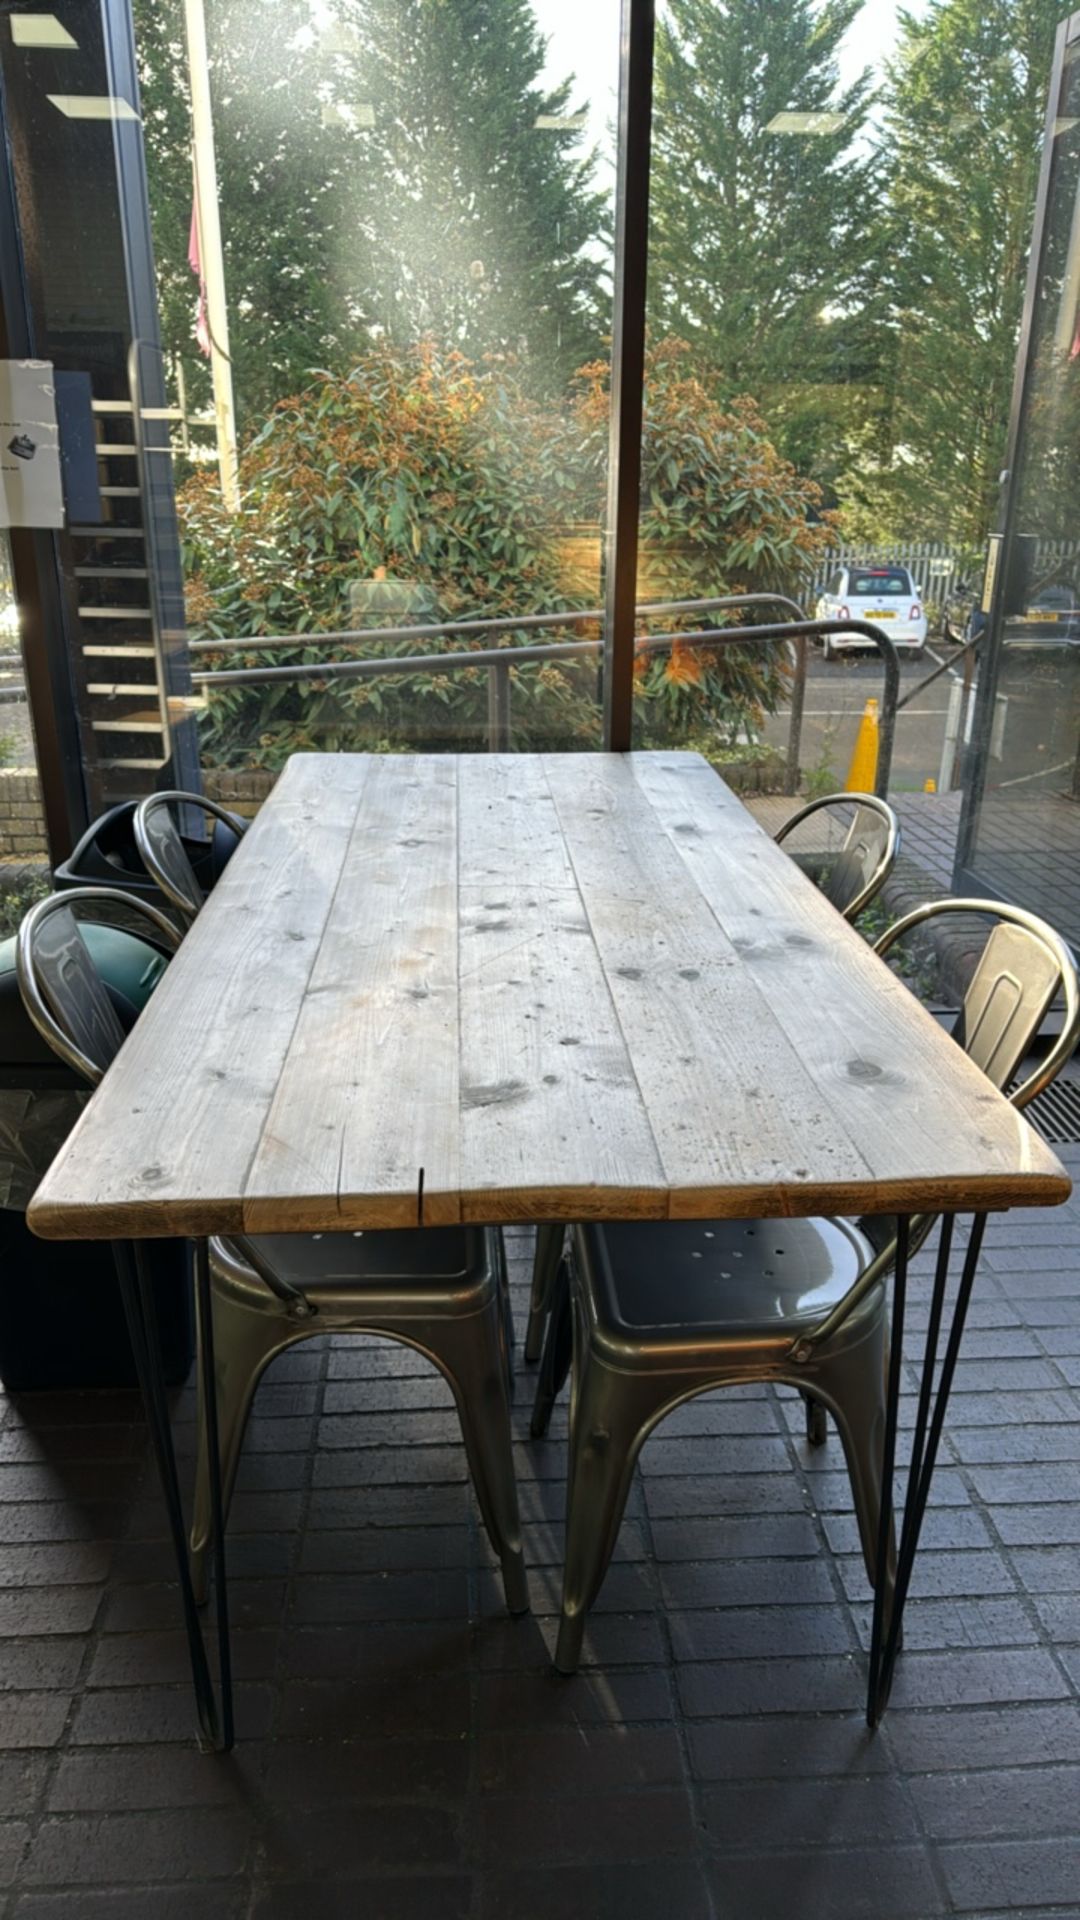 Wooden Tables and Chairs - Image 2 of 2